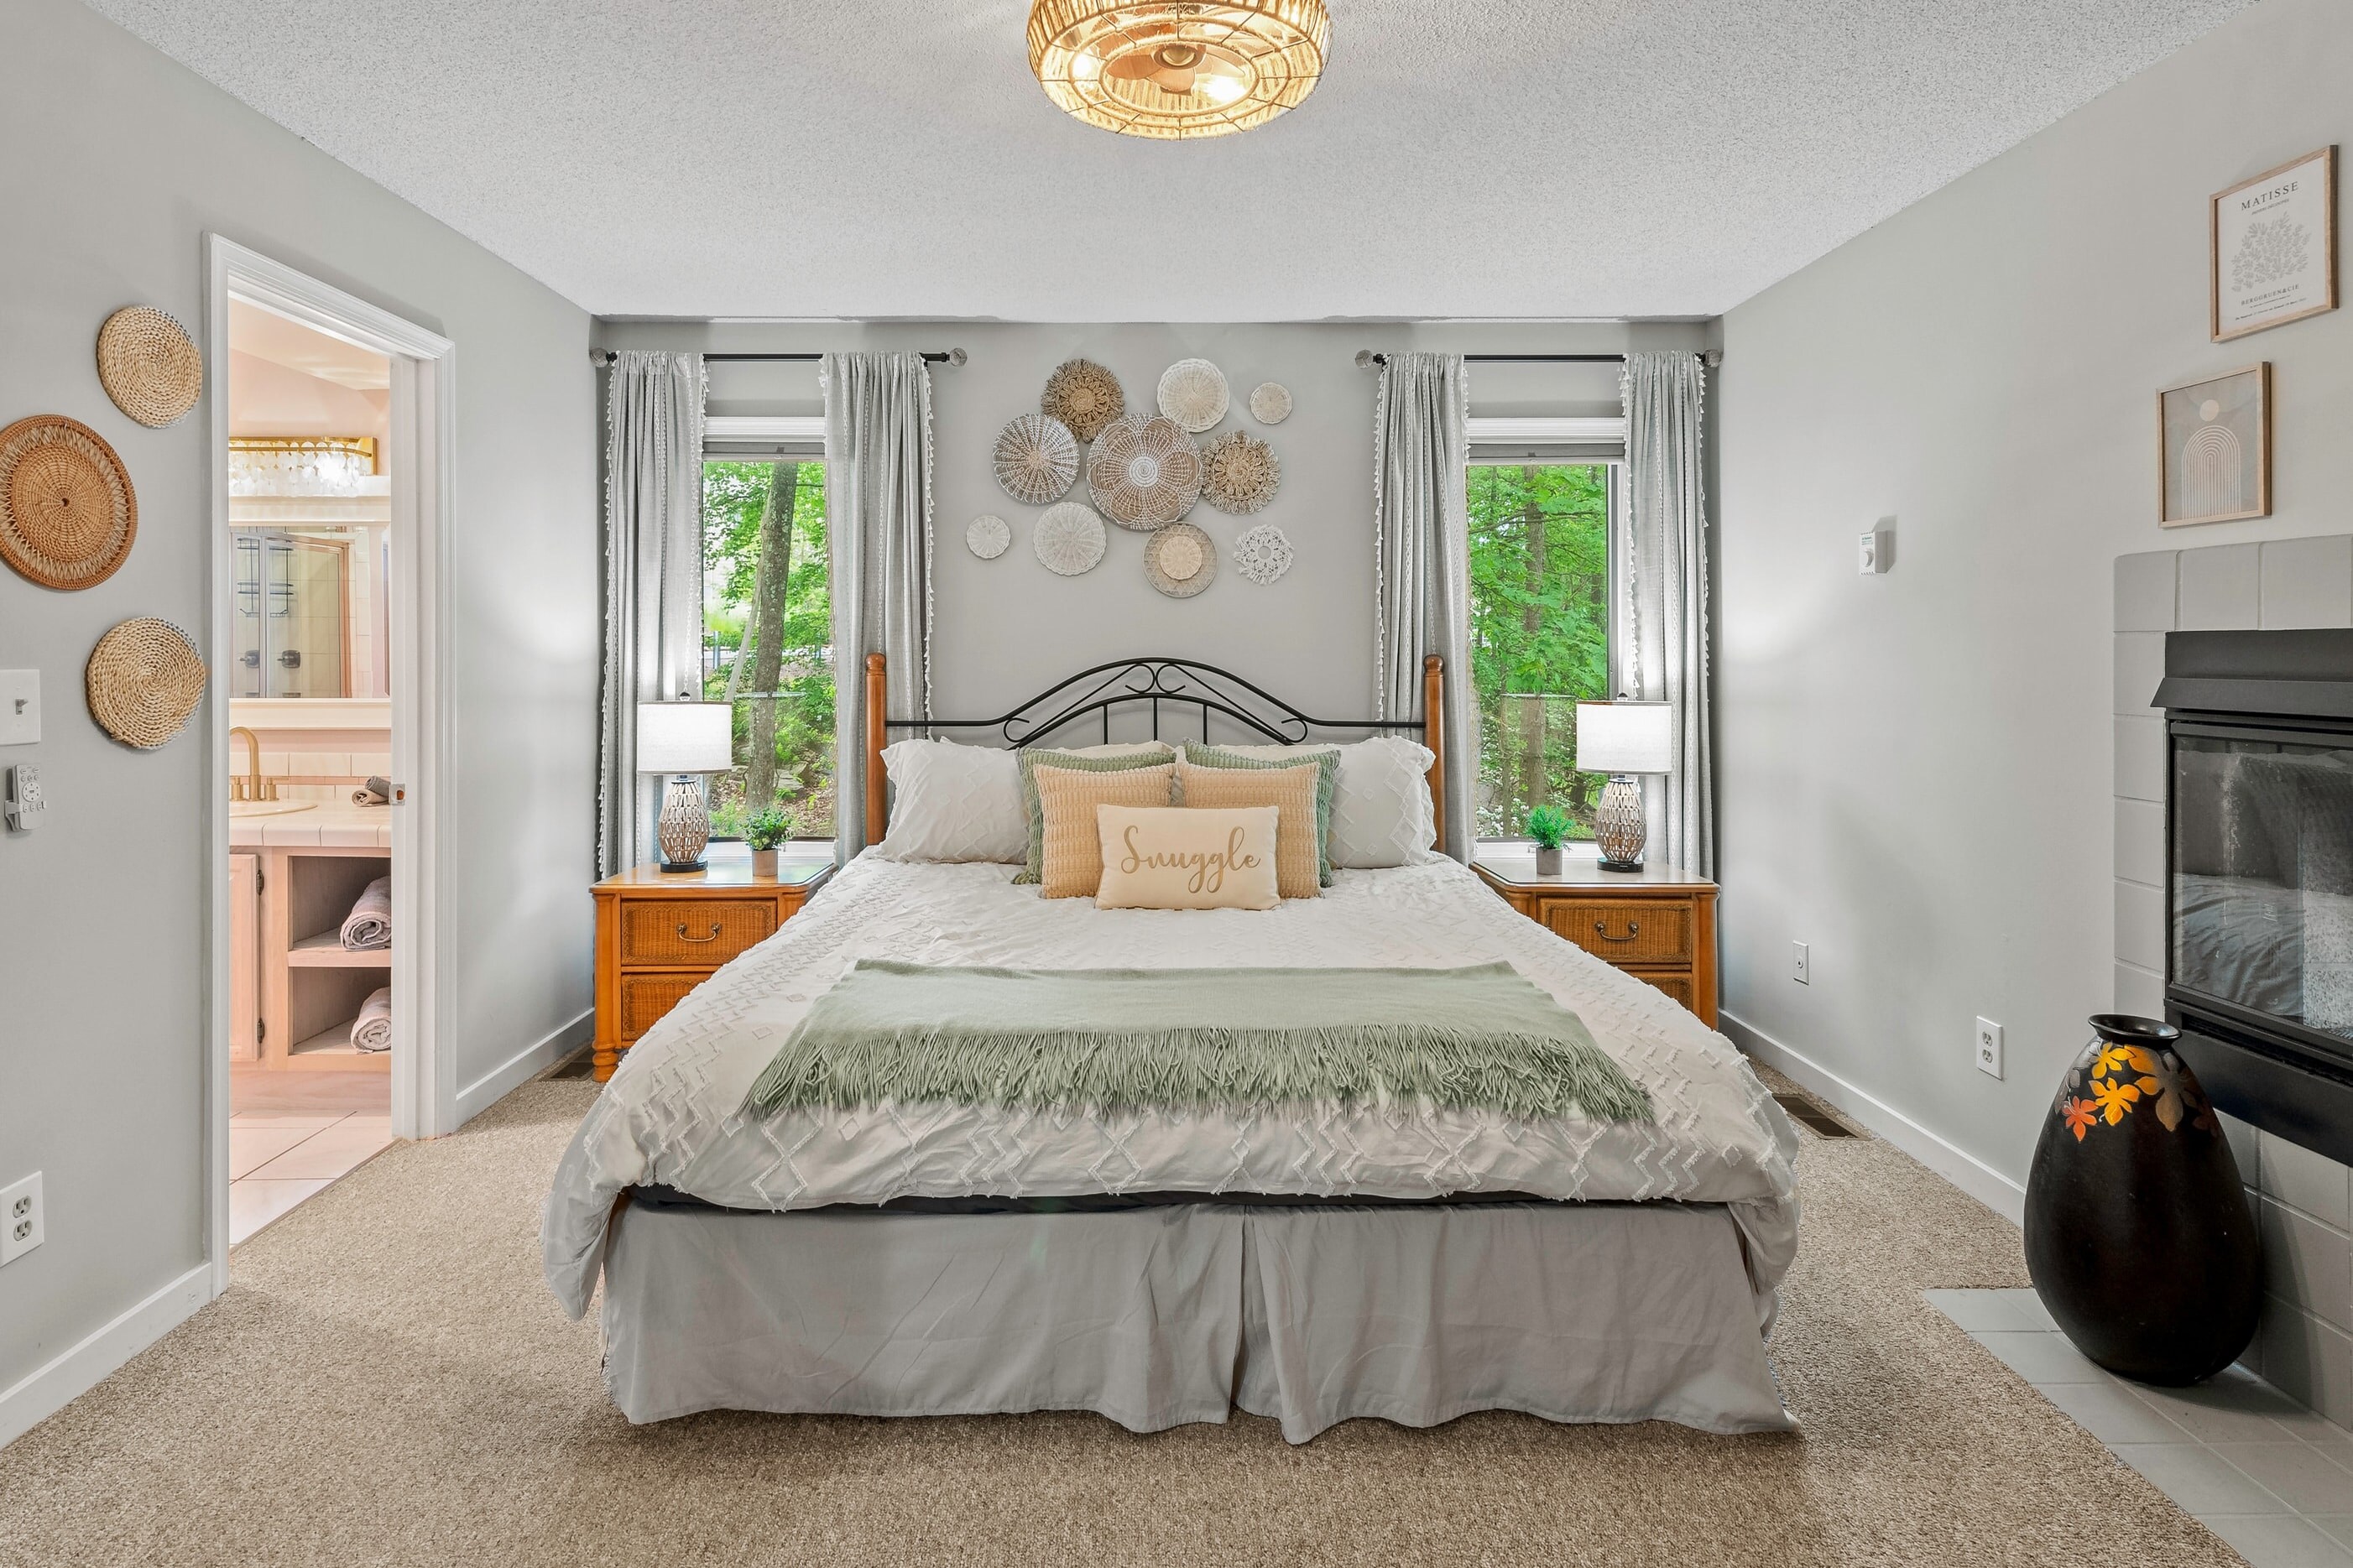 The primary bedroom features a king-sized bed, TV, fireplace, and ensuite bathroom.